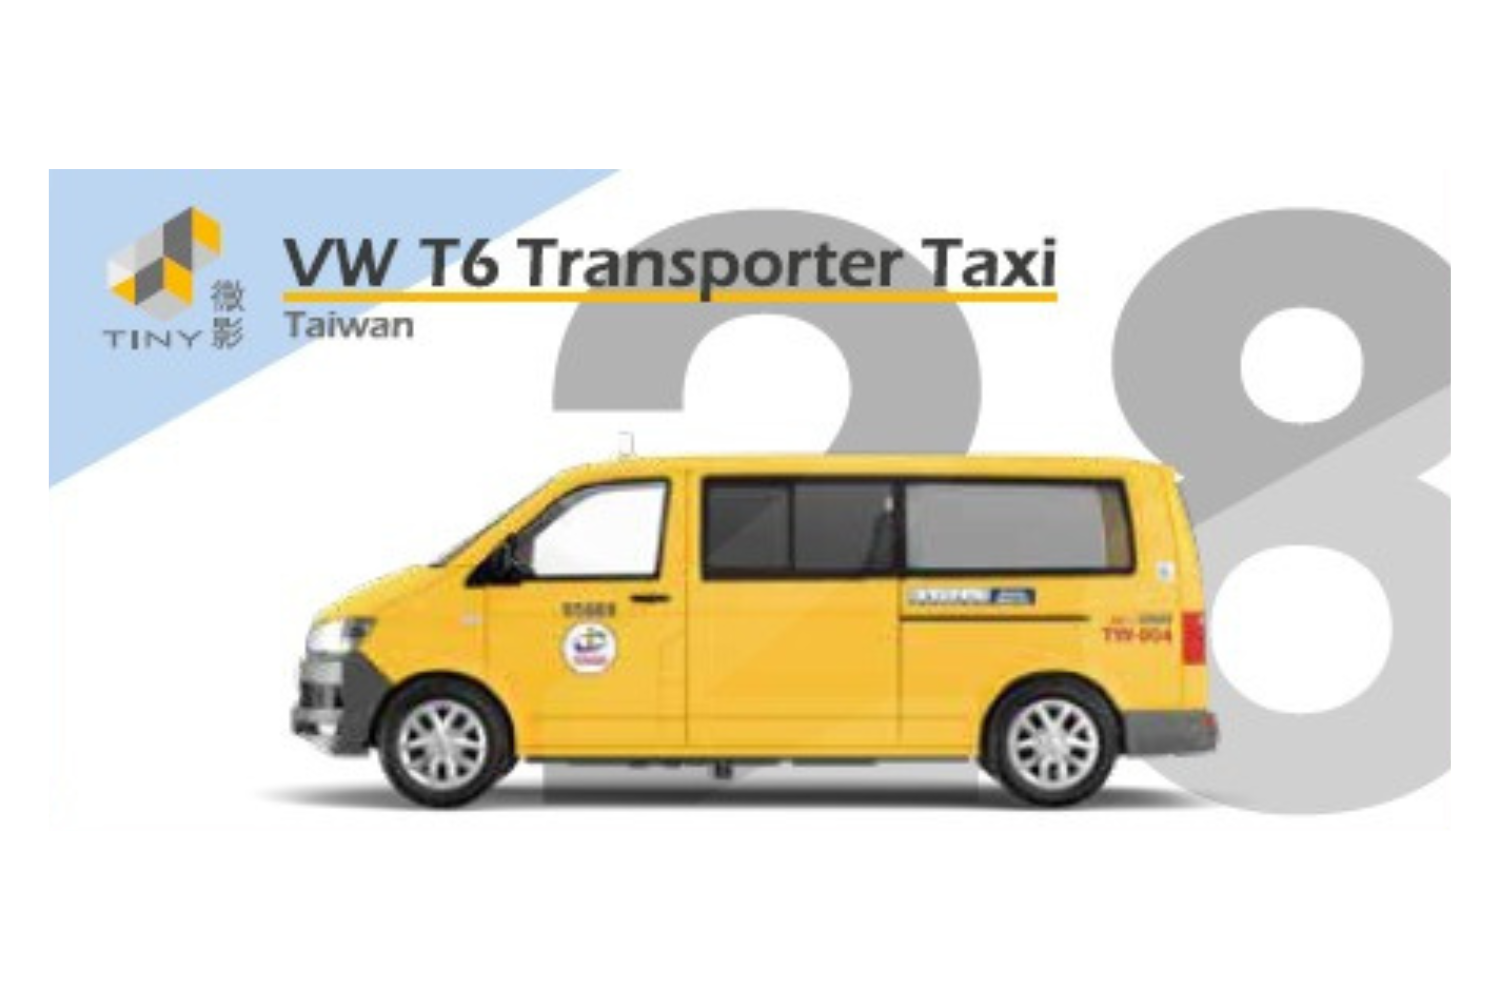 Tiny City TW28 Diecast - VW T6 Transporter Taxi - Toy Space Diecast Online Store Singapore